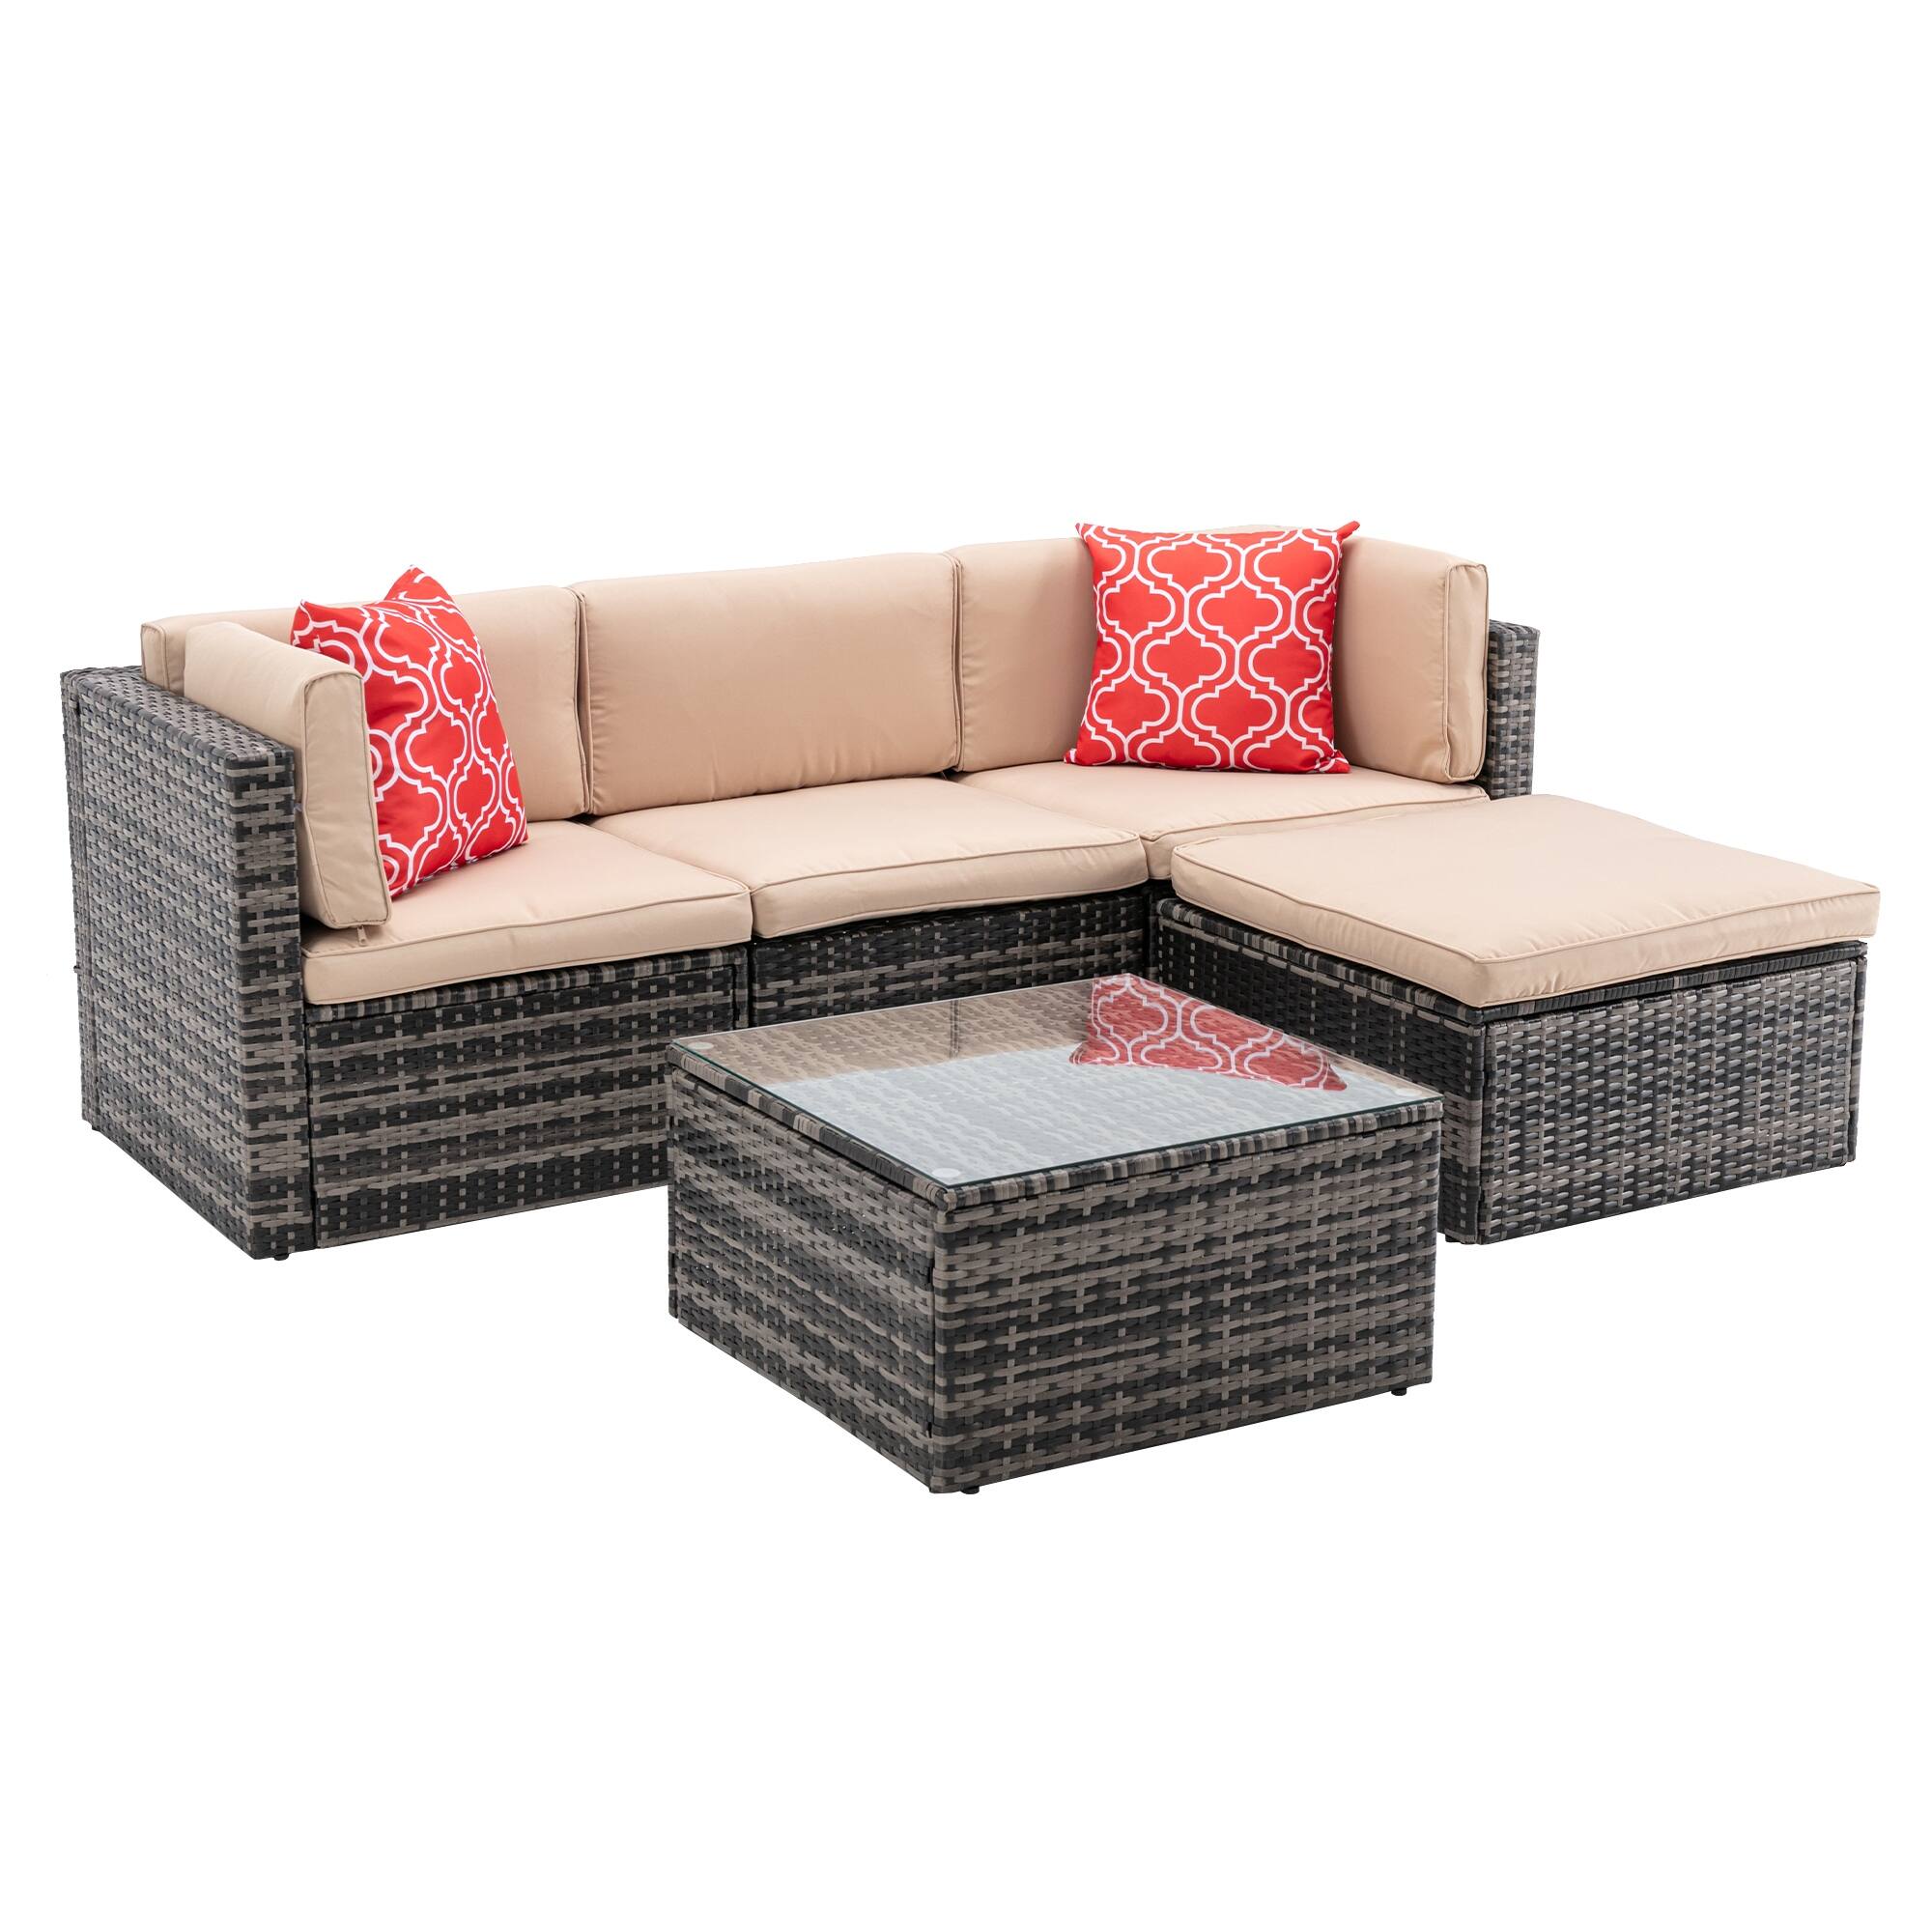 Outdoor Patio Furniture Set, 5 Piece PE Rattan Wicker Sectional Sofa with Cushions and Coffee Table, Garden Style